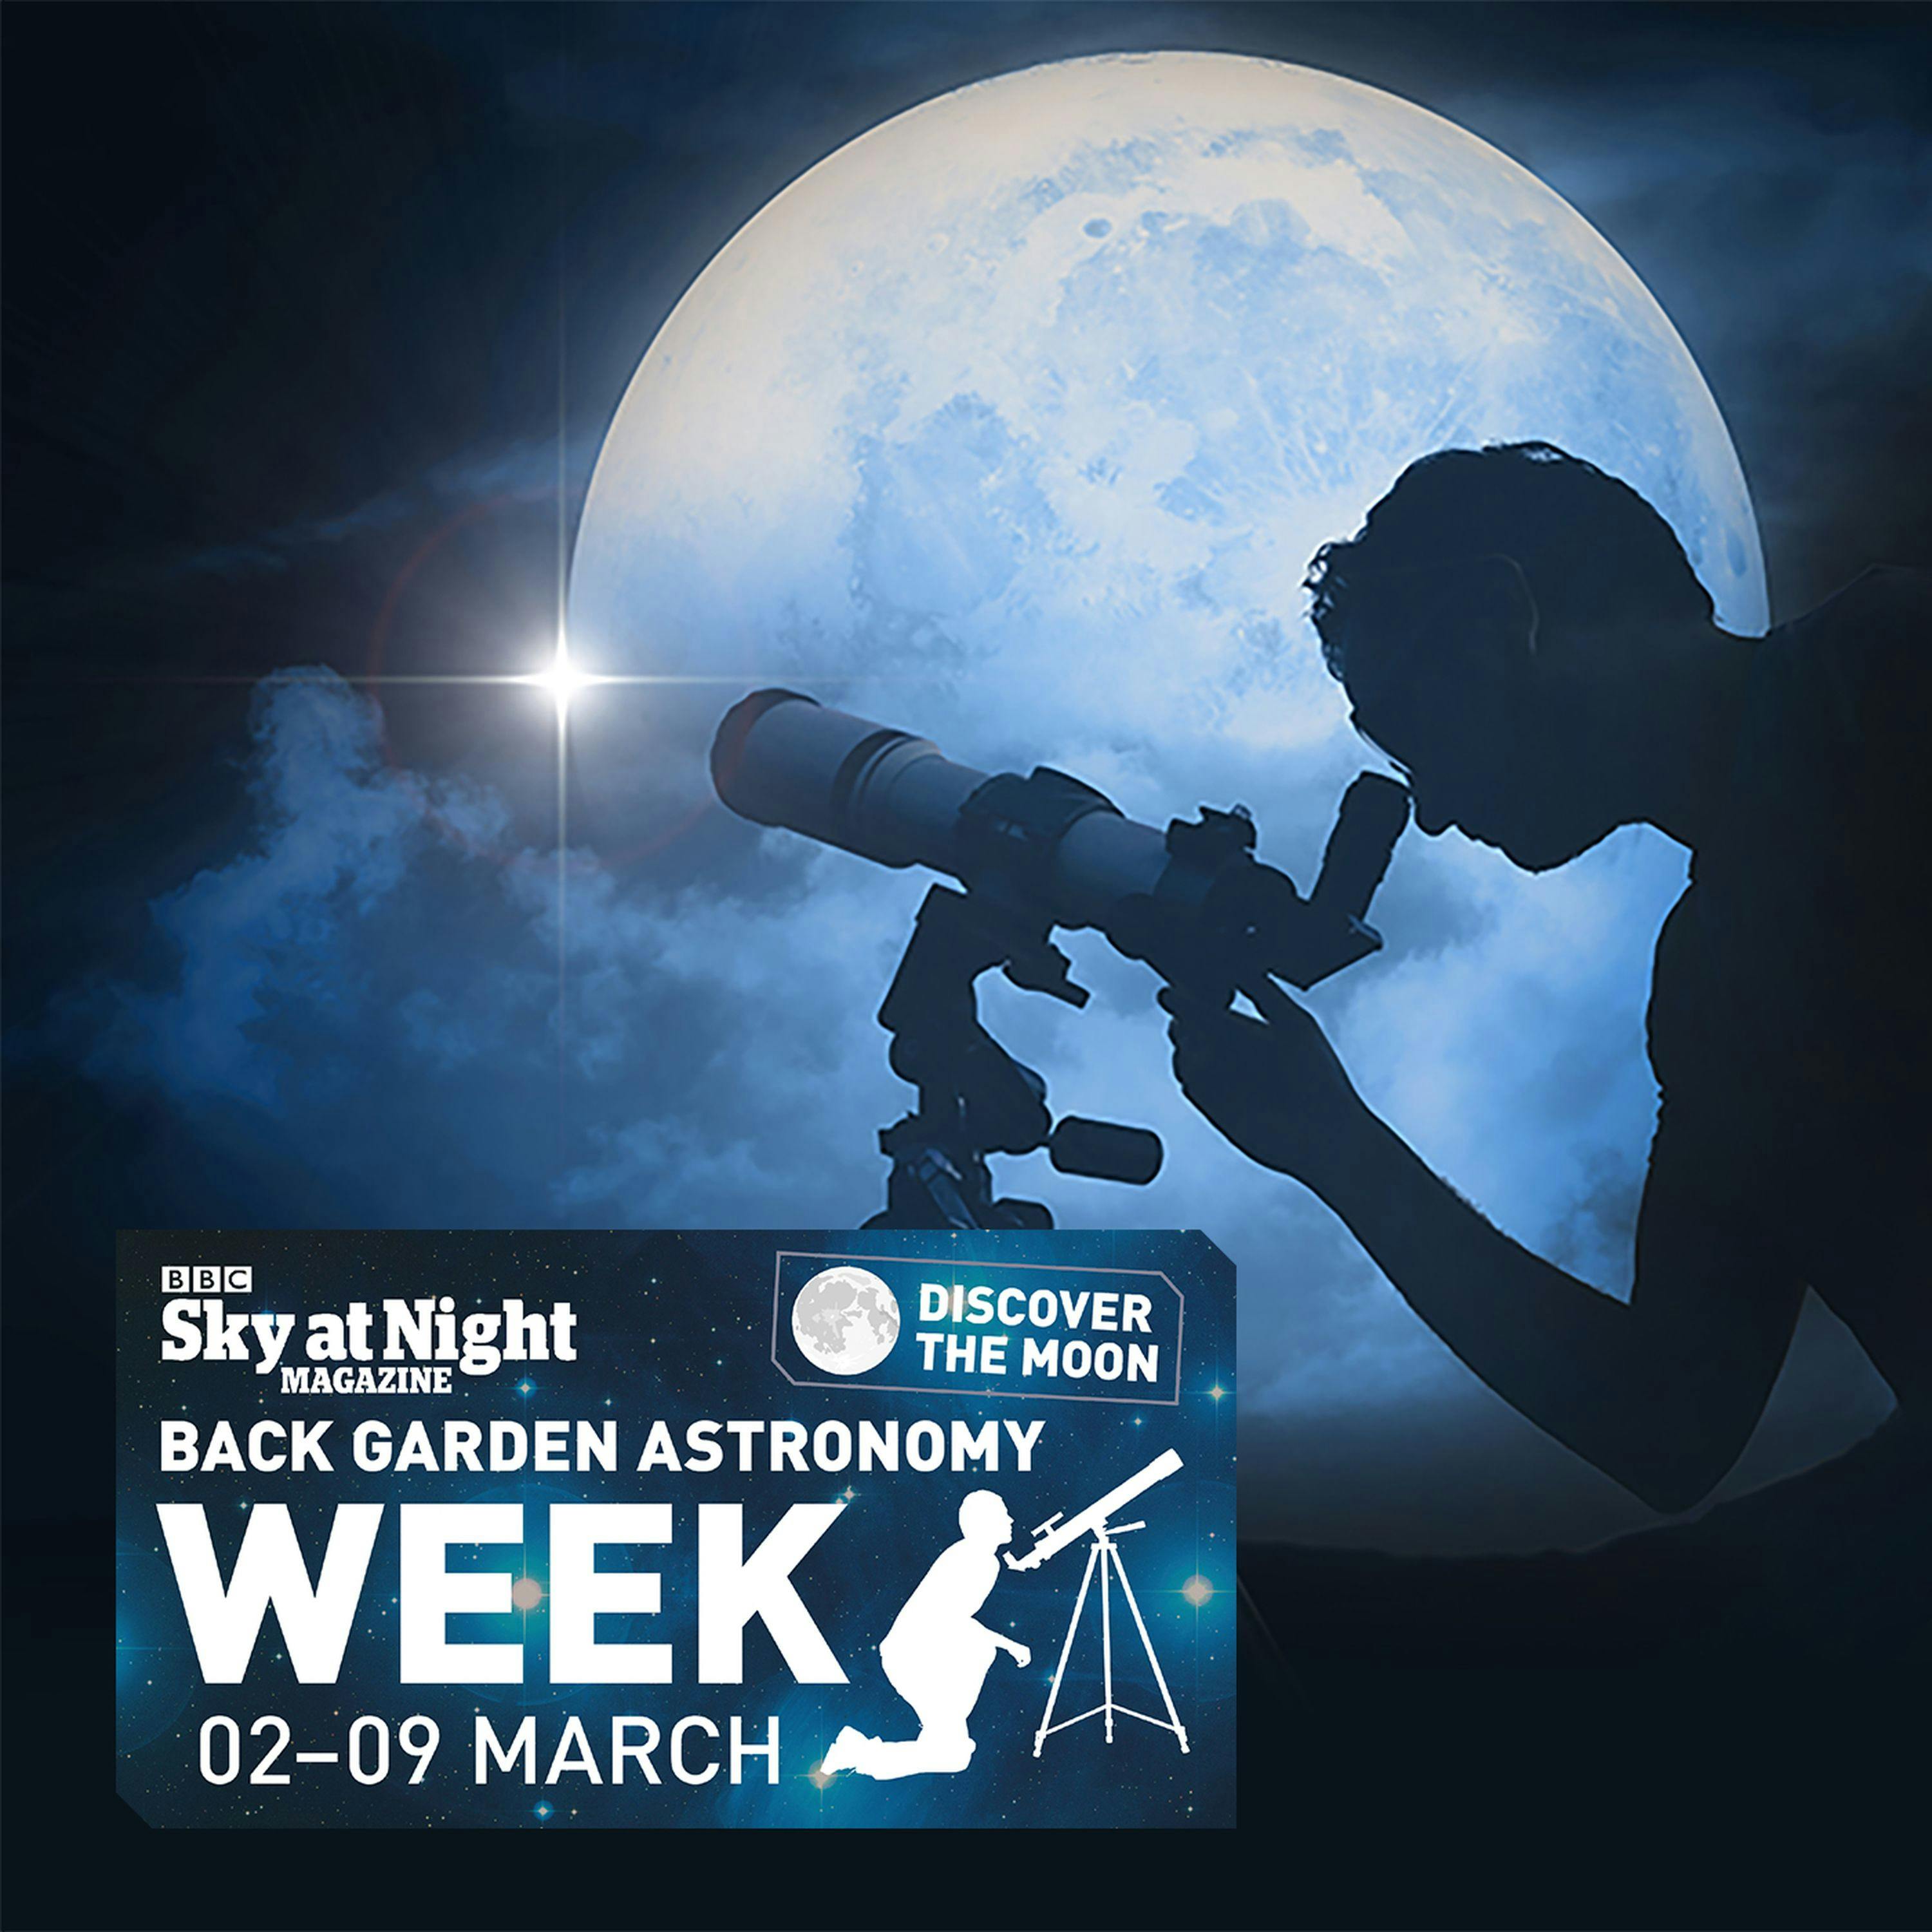 Day Five – Back Garden Astronomy Week: The Moon